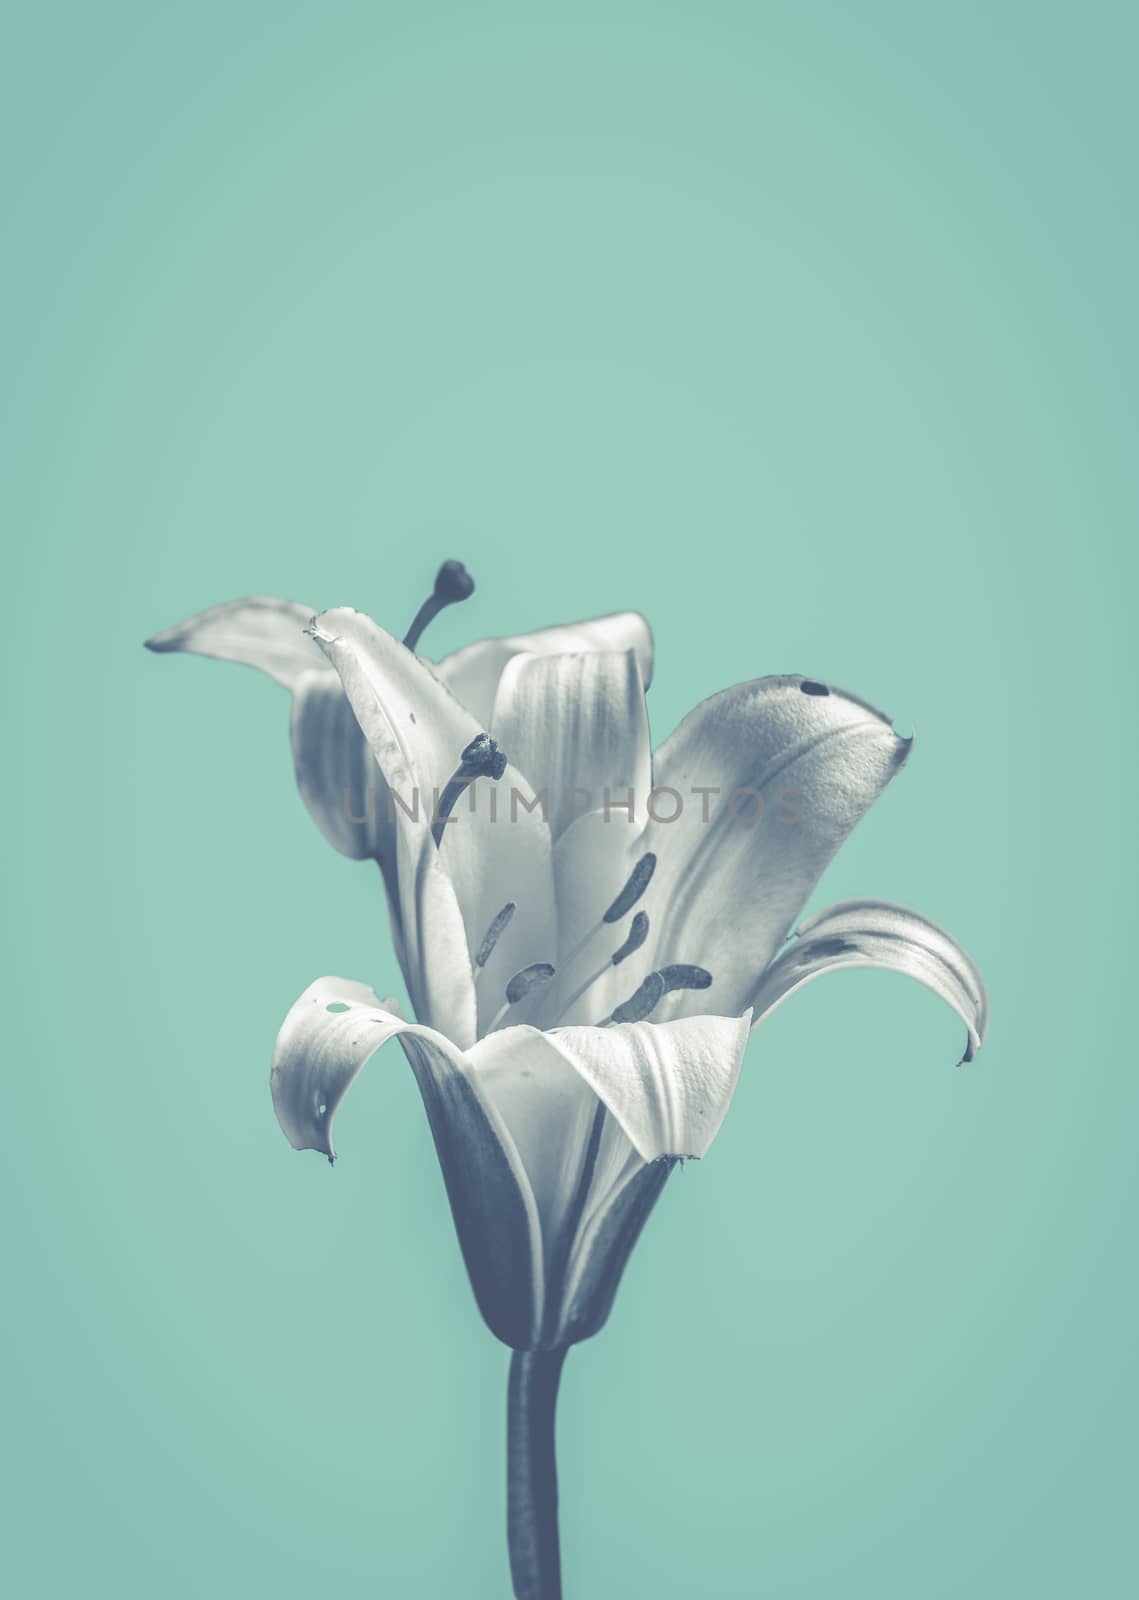 Delicate Flower In Black And White Against Pastel Blue Background